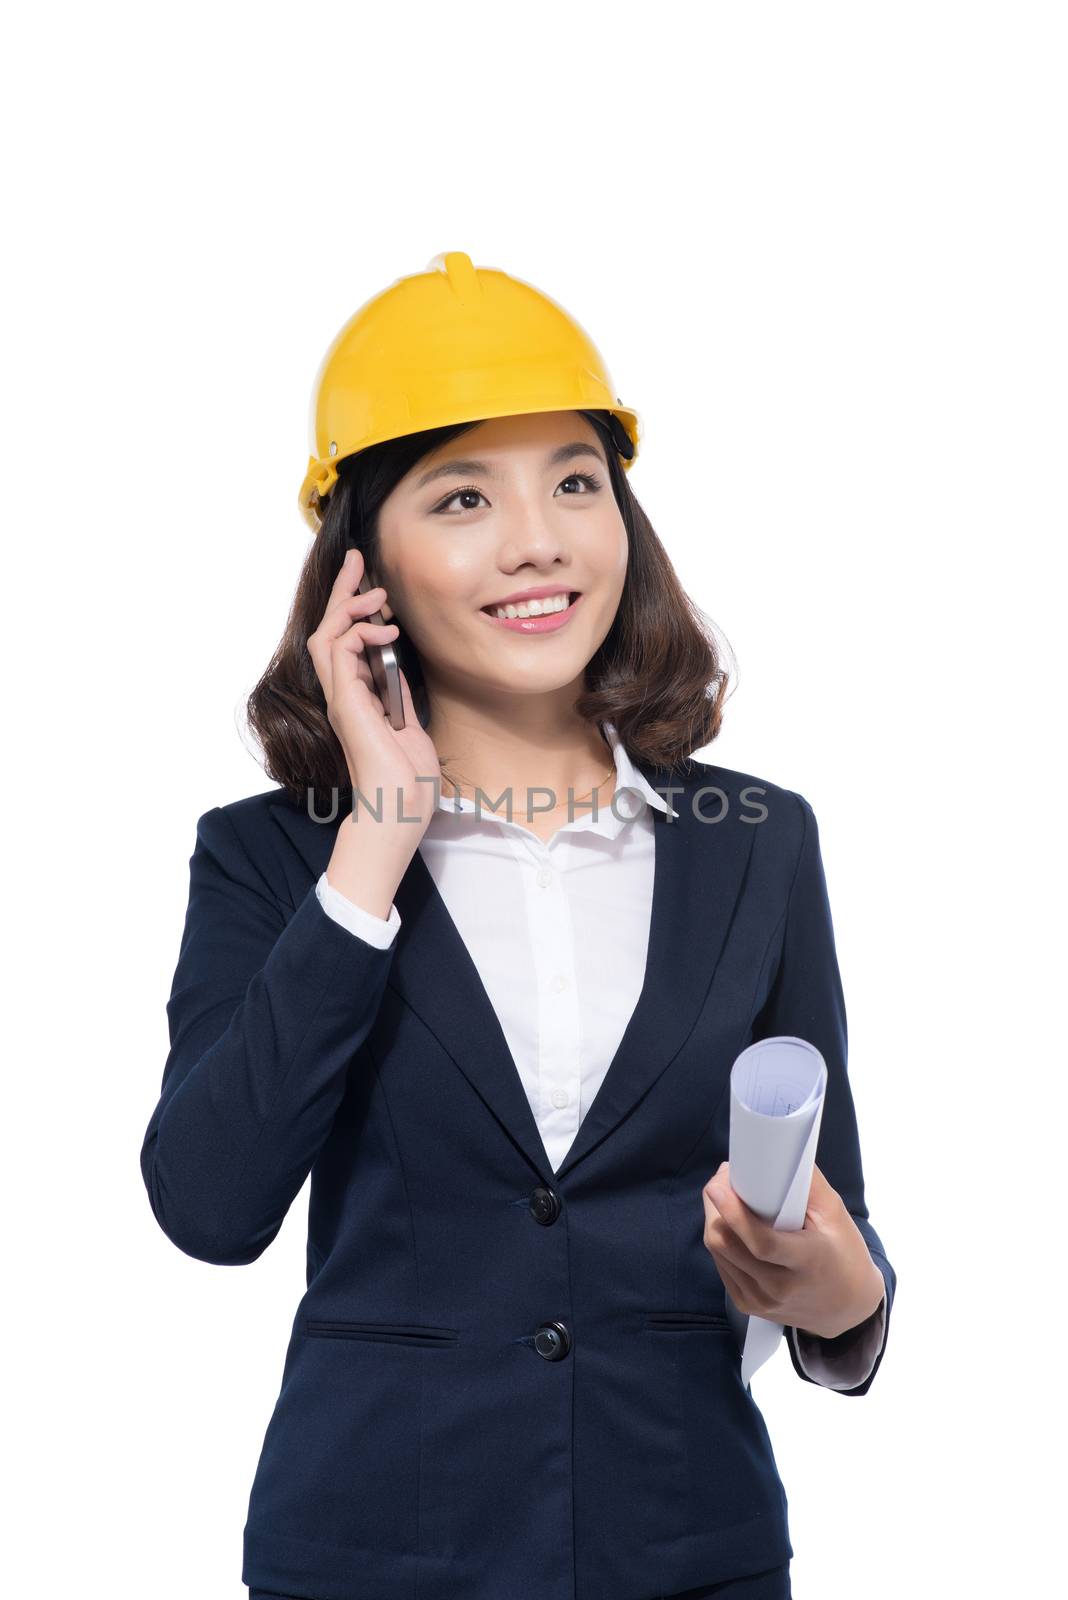 Smiling architect woman using smartphone isolated on white.